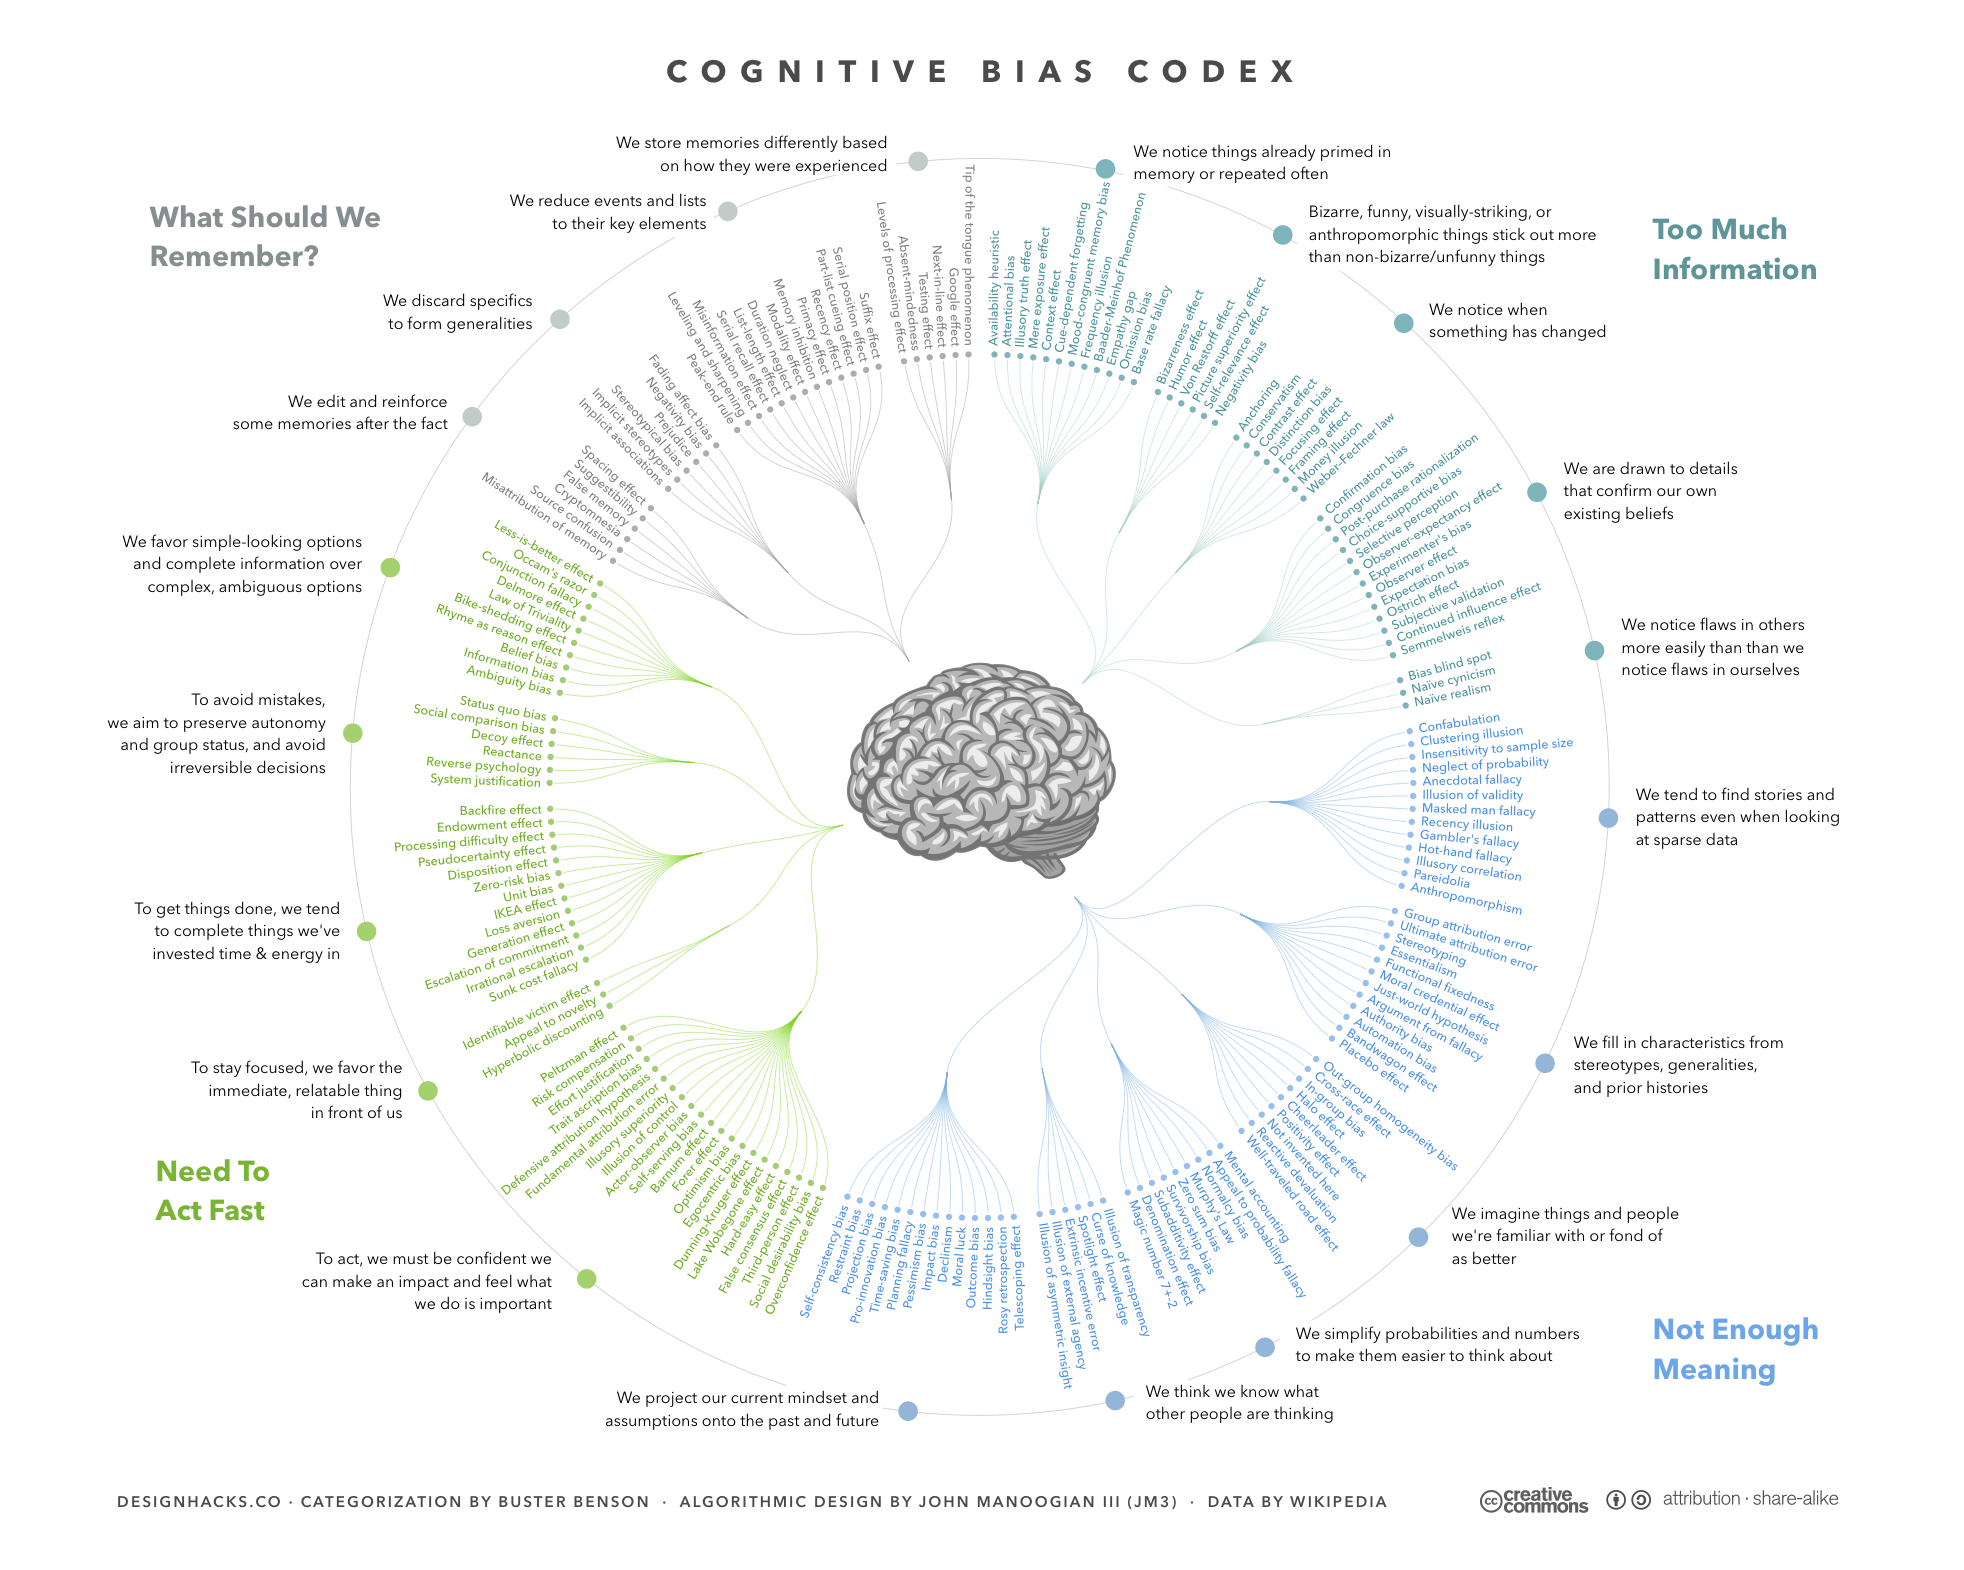 The_Cognitive_Bias_Codex_-_180+_biases,designed_by_John_Manoogian_III(jm3).png